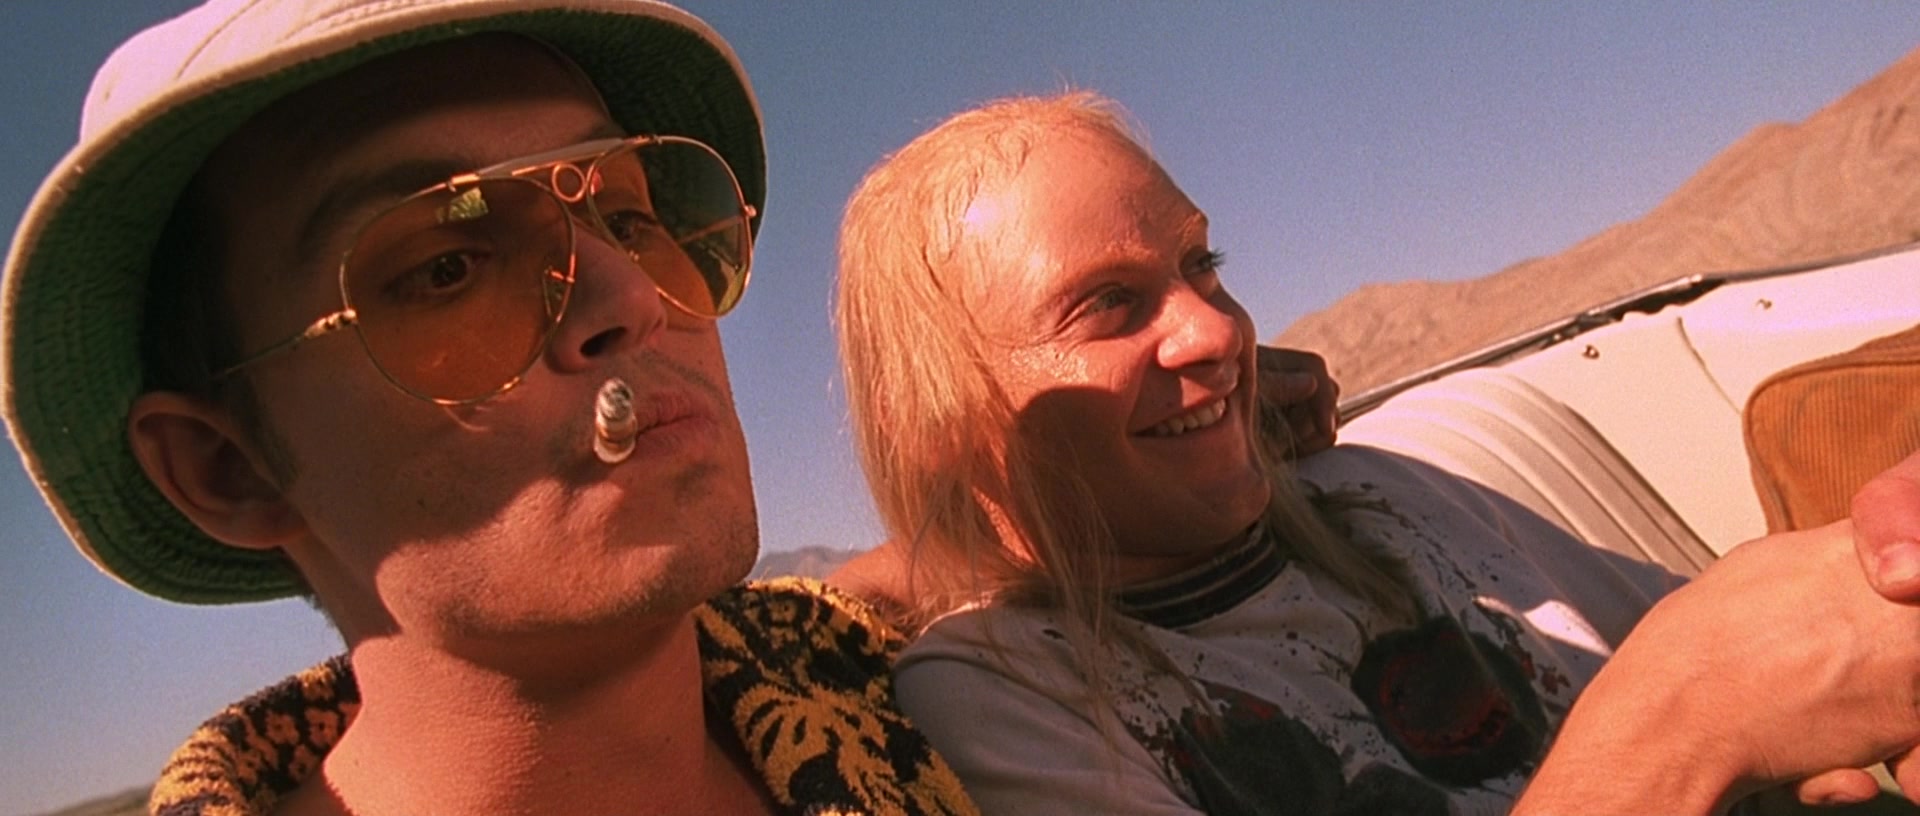 Ray-Ban Shooter RB3138 Aviator Sunglasses Worn by Johnny Depp in Fear and Loathing in ...